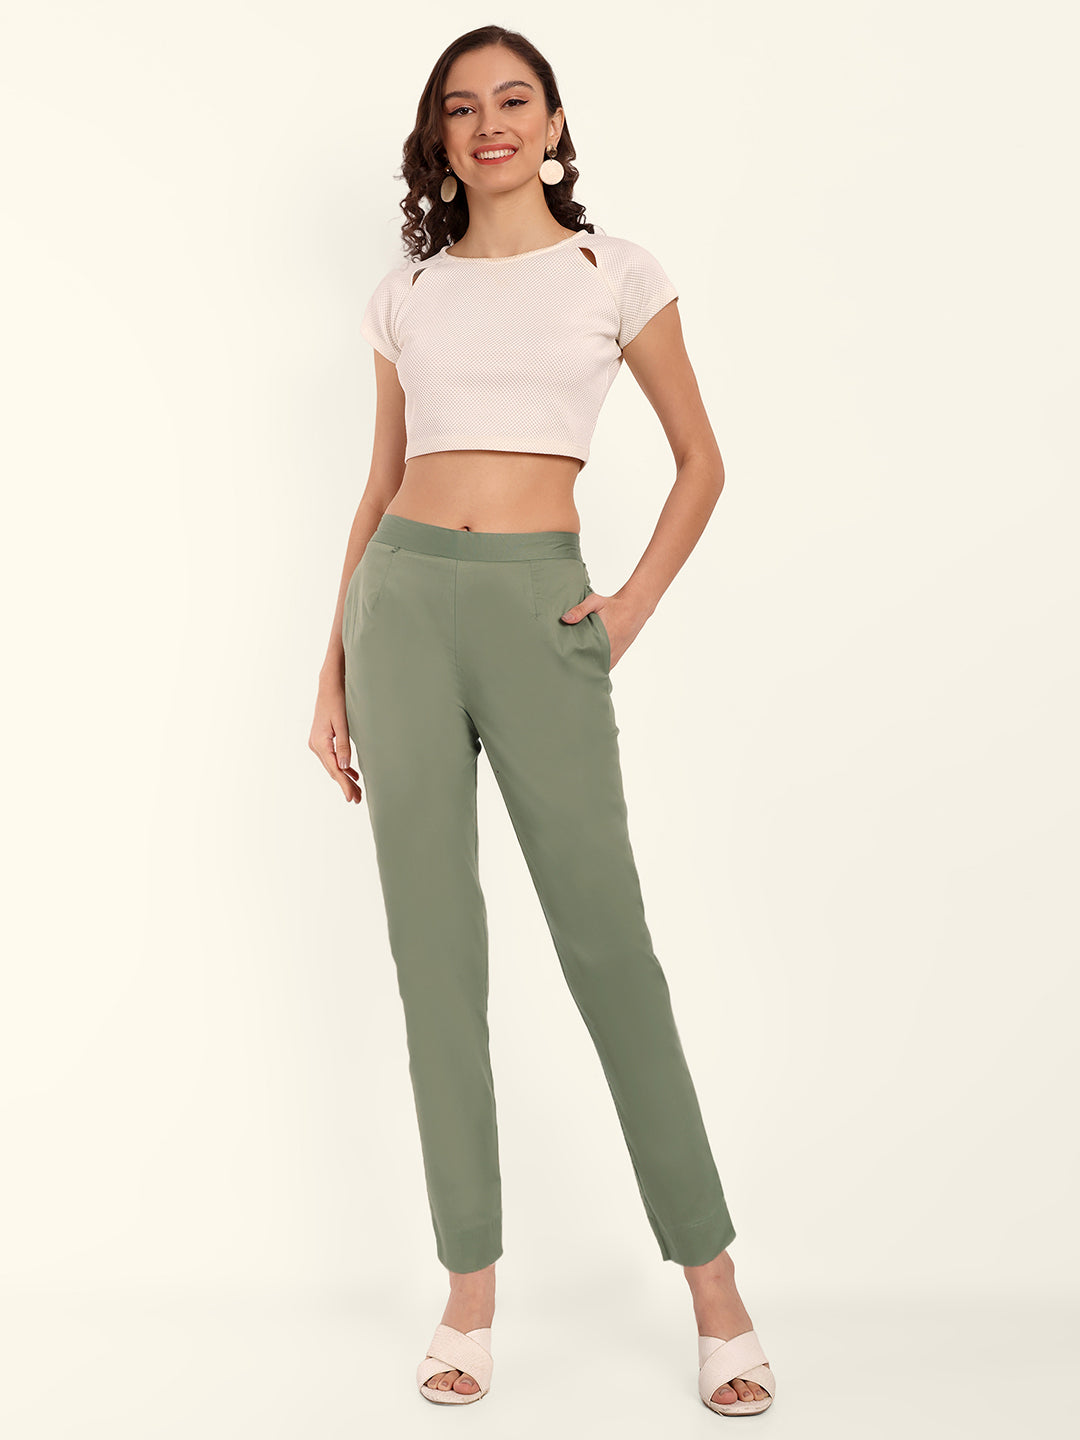 Stretchable formal pants for womens